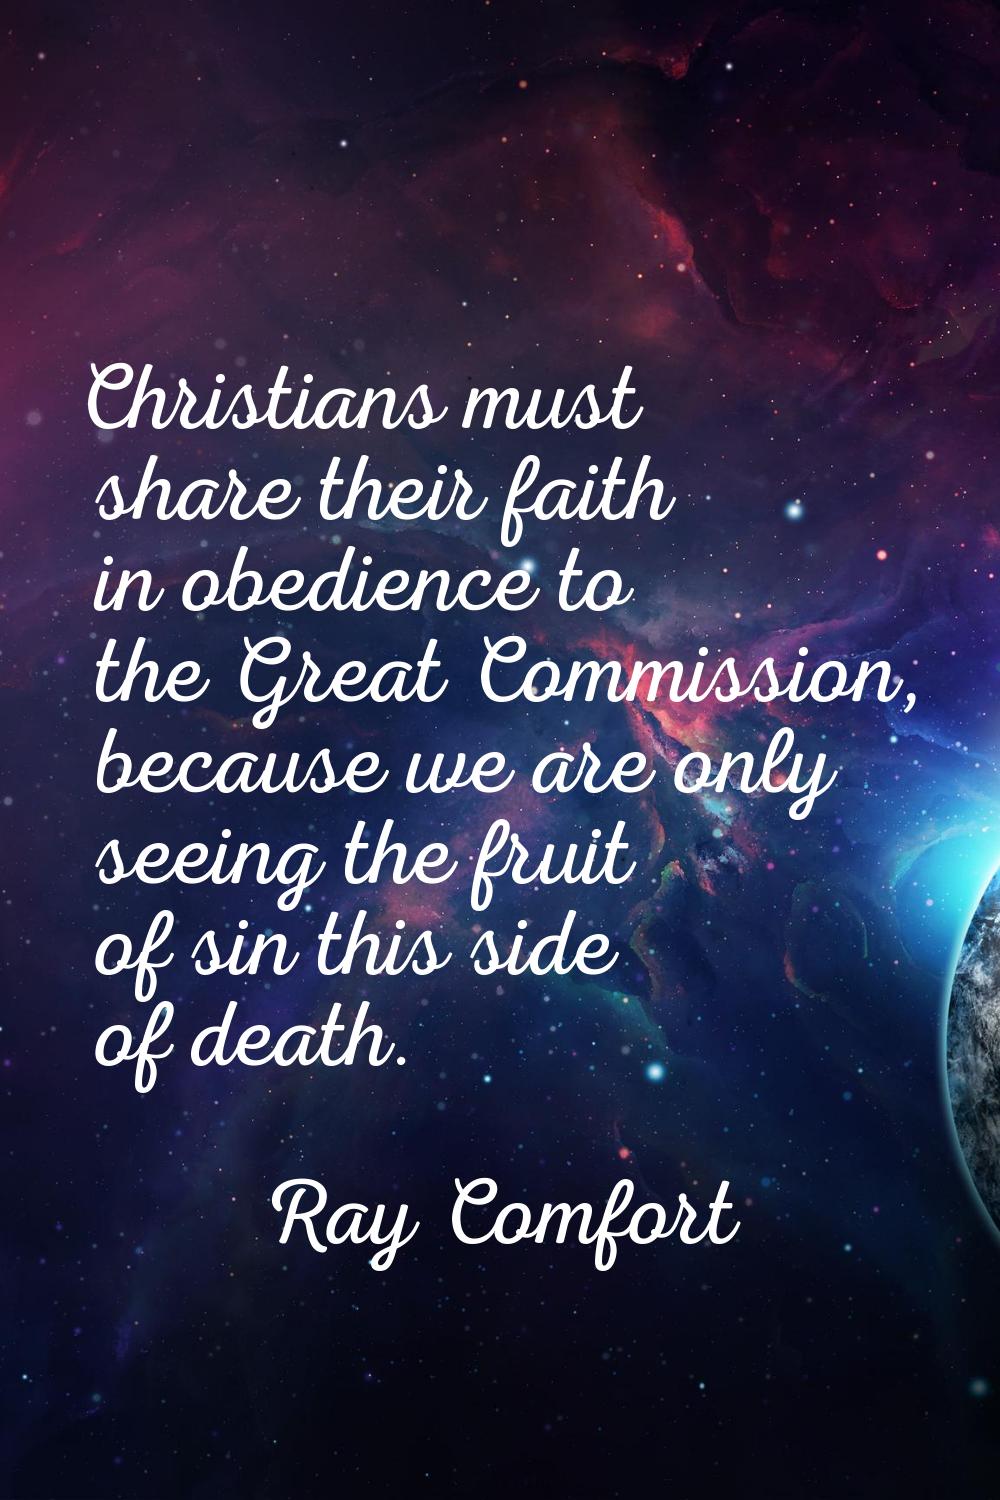 Christians must share their faith in obedience to the Great Commission, because we are only seeing 